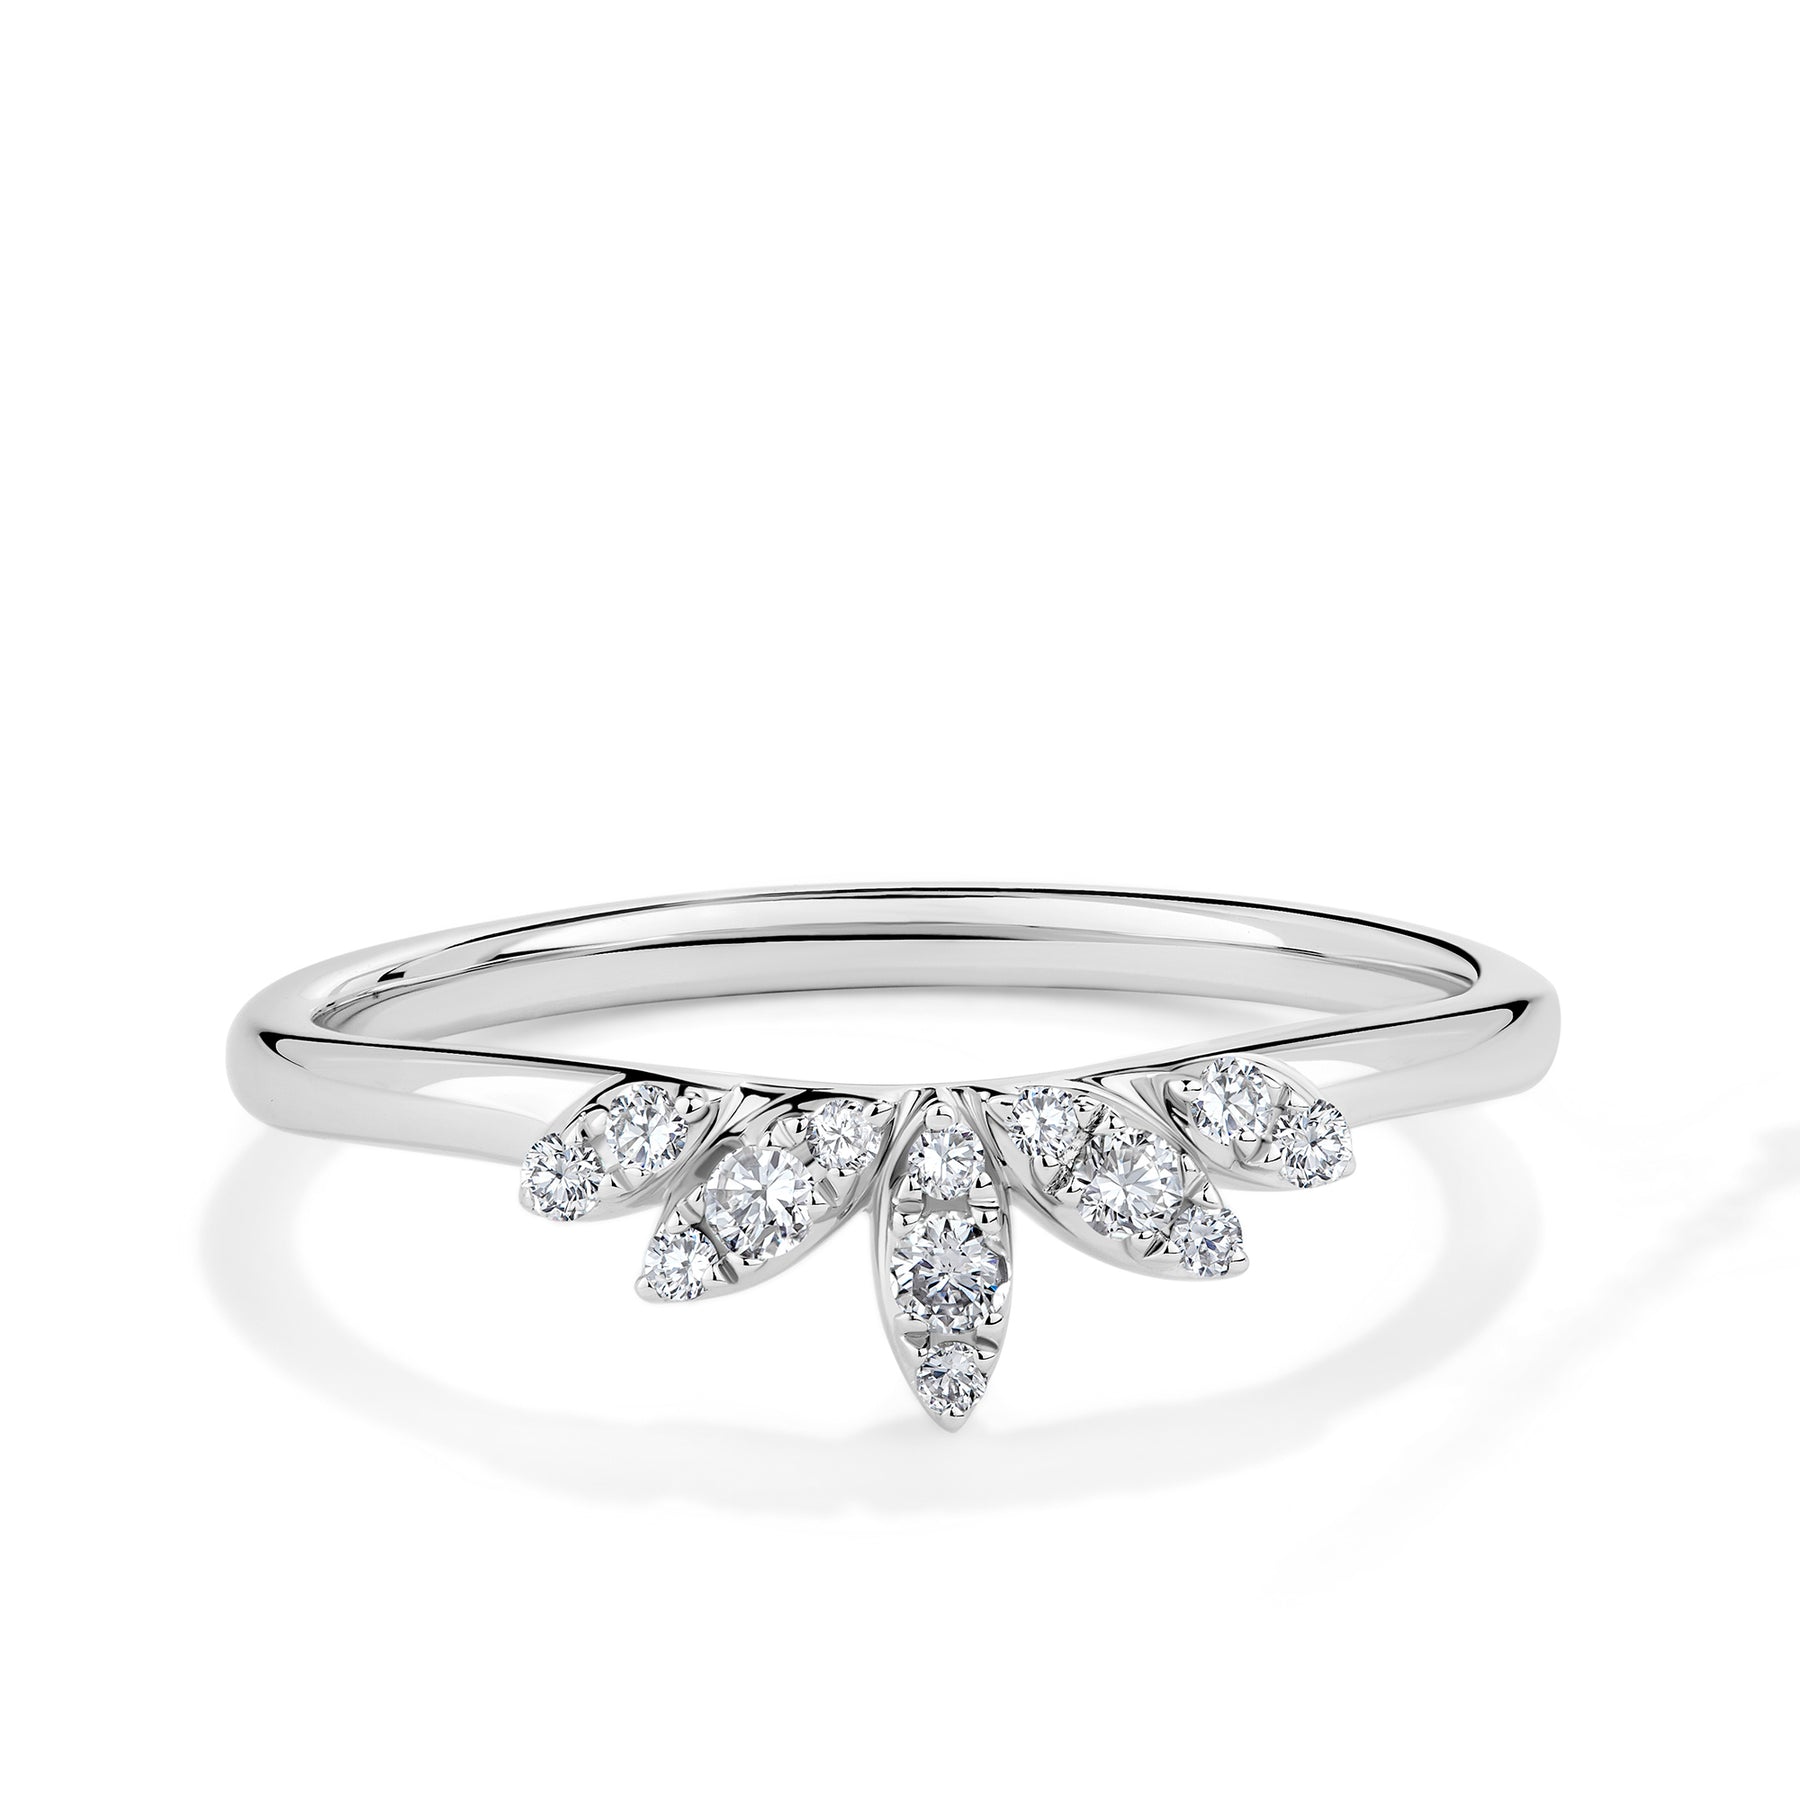 Marquise Round Diamond Ring in 9ct White Gold